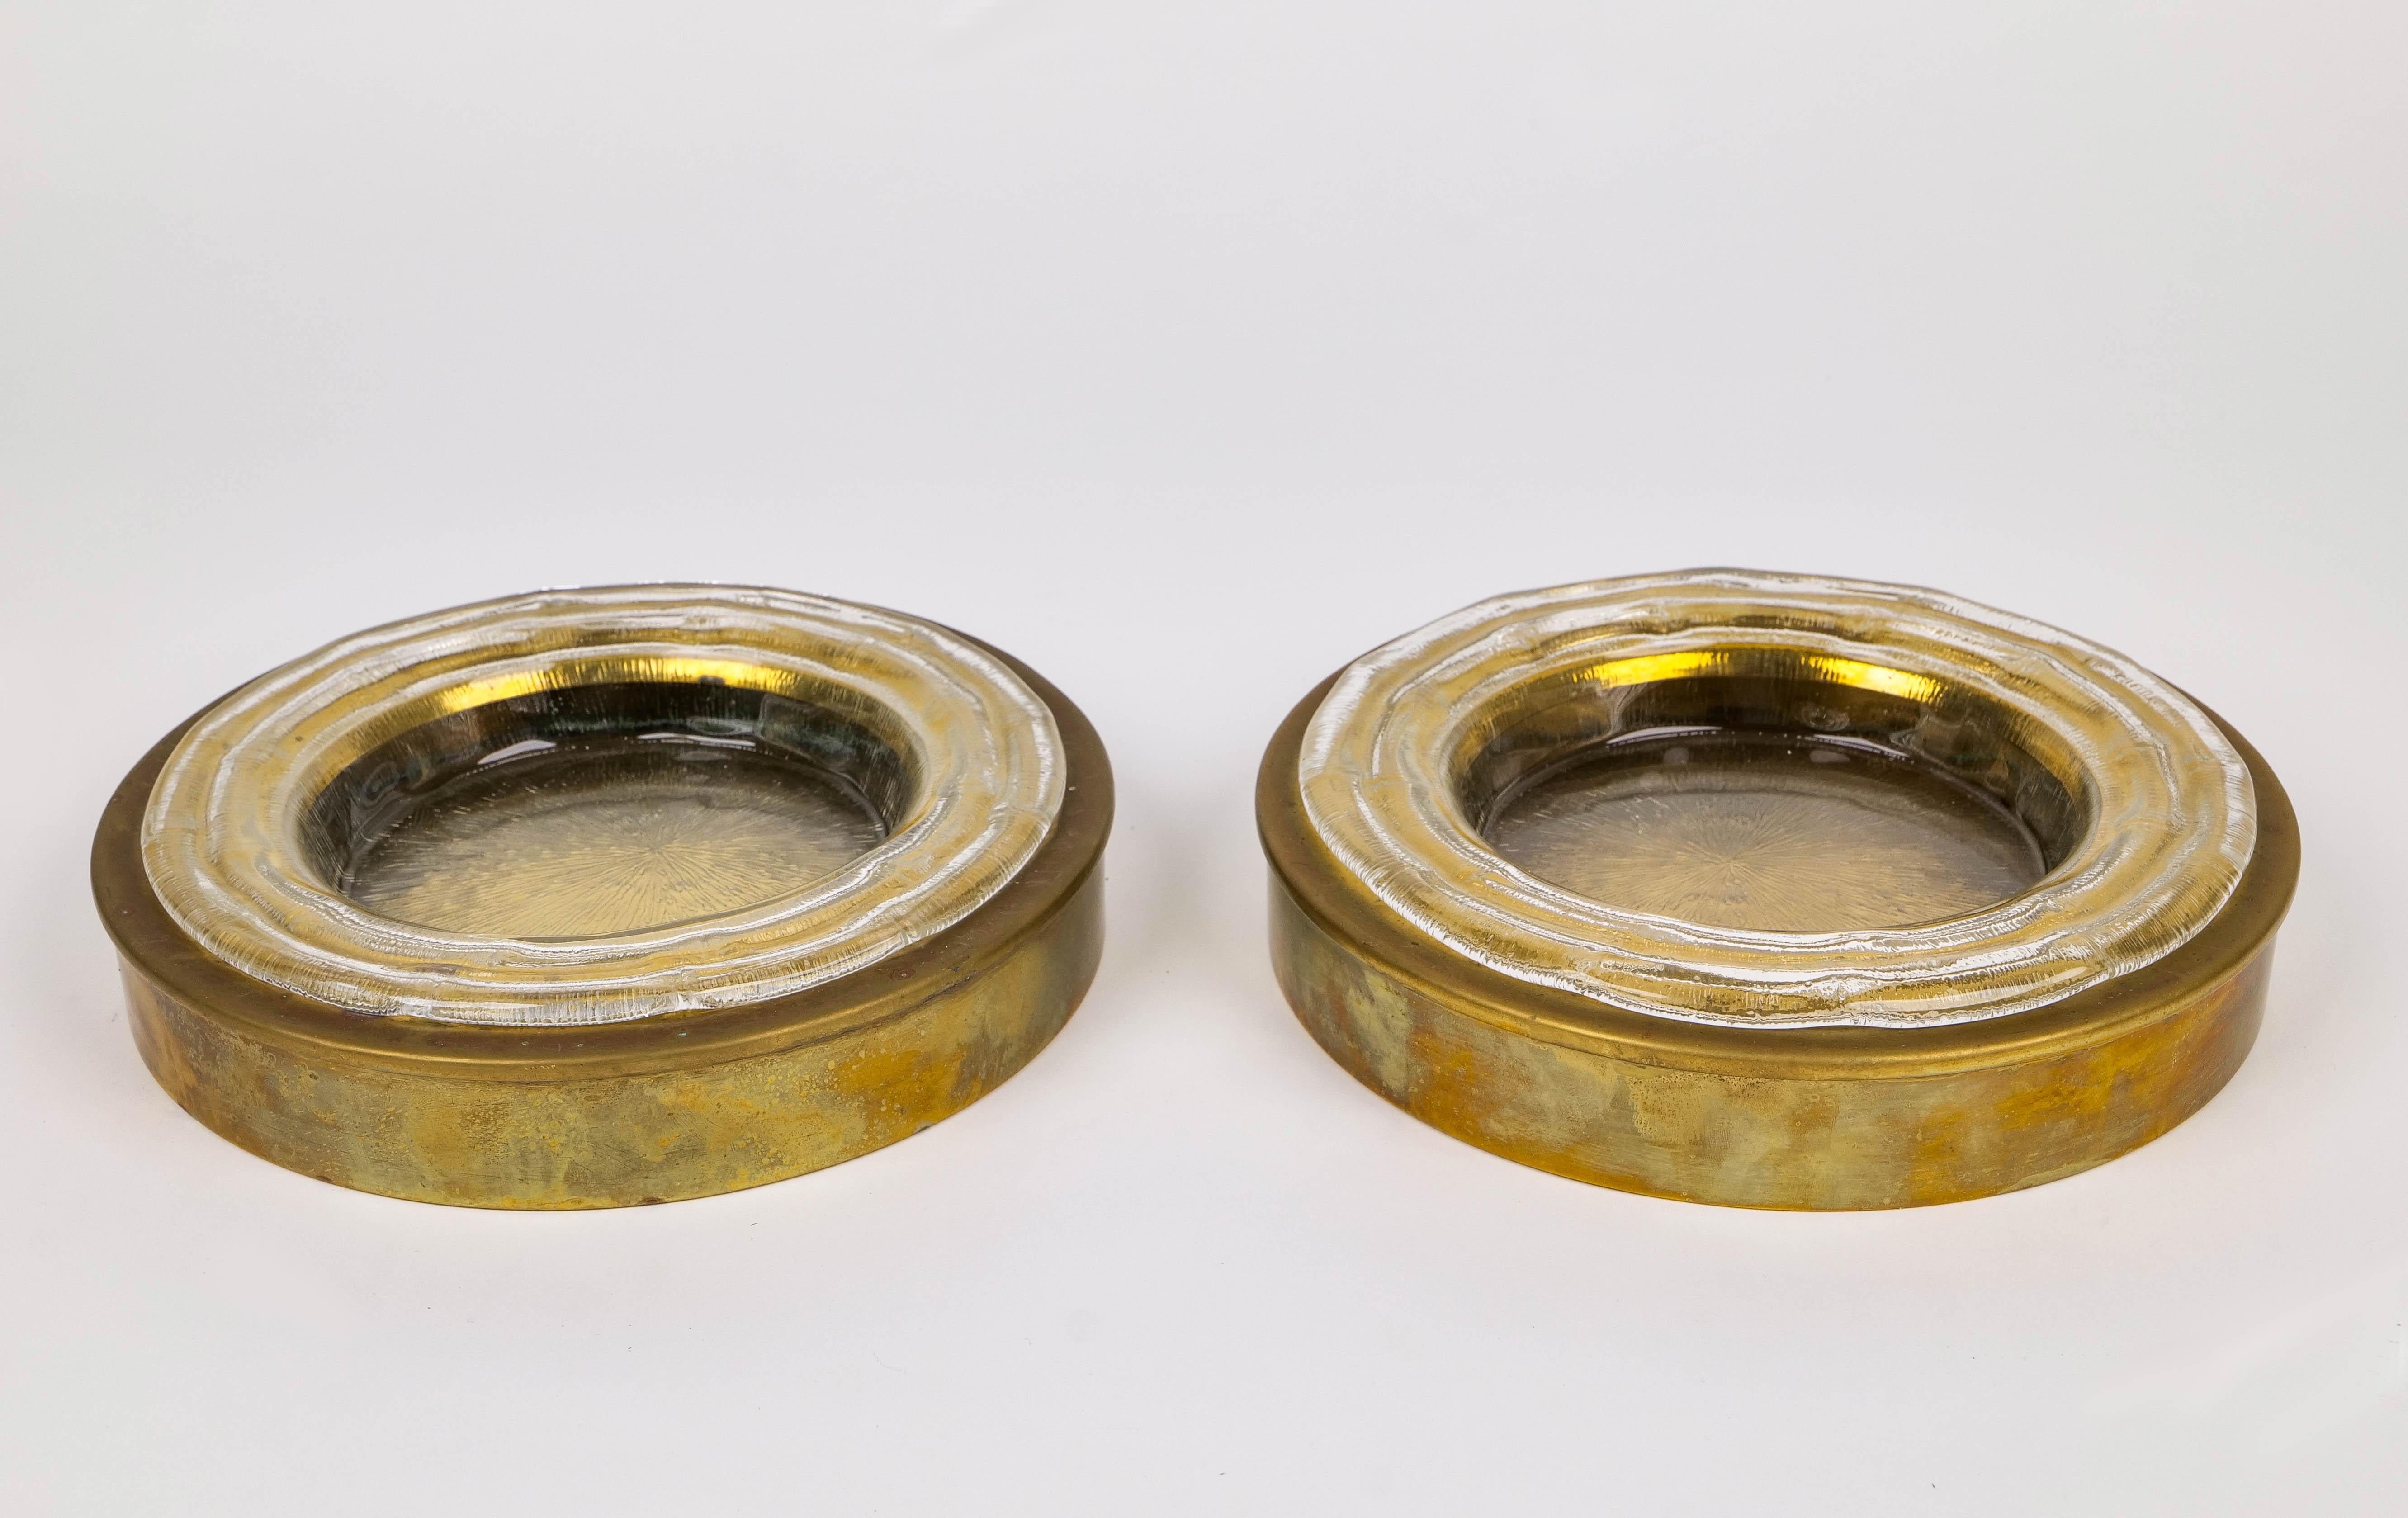 Pair of Round Vide Pocket Emptier Bowls in Brass and Murano Glass, Italy, 1970s For Sale 2